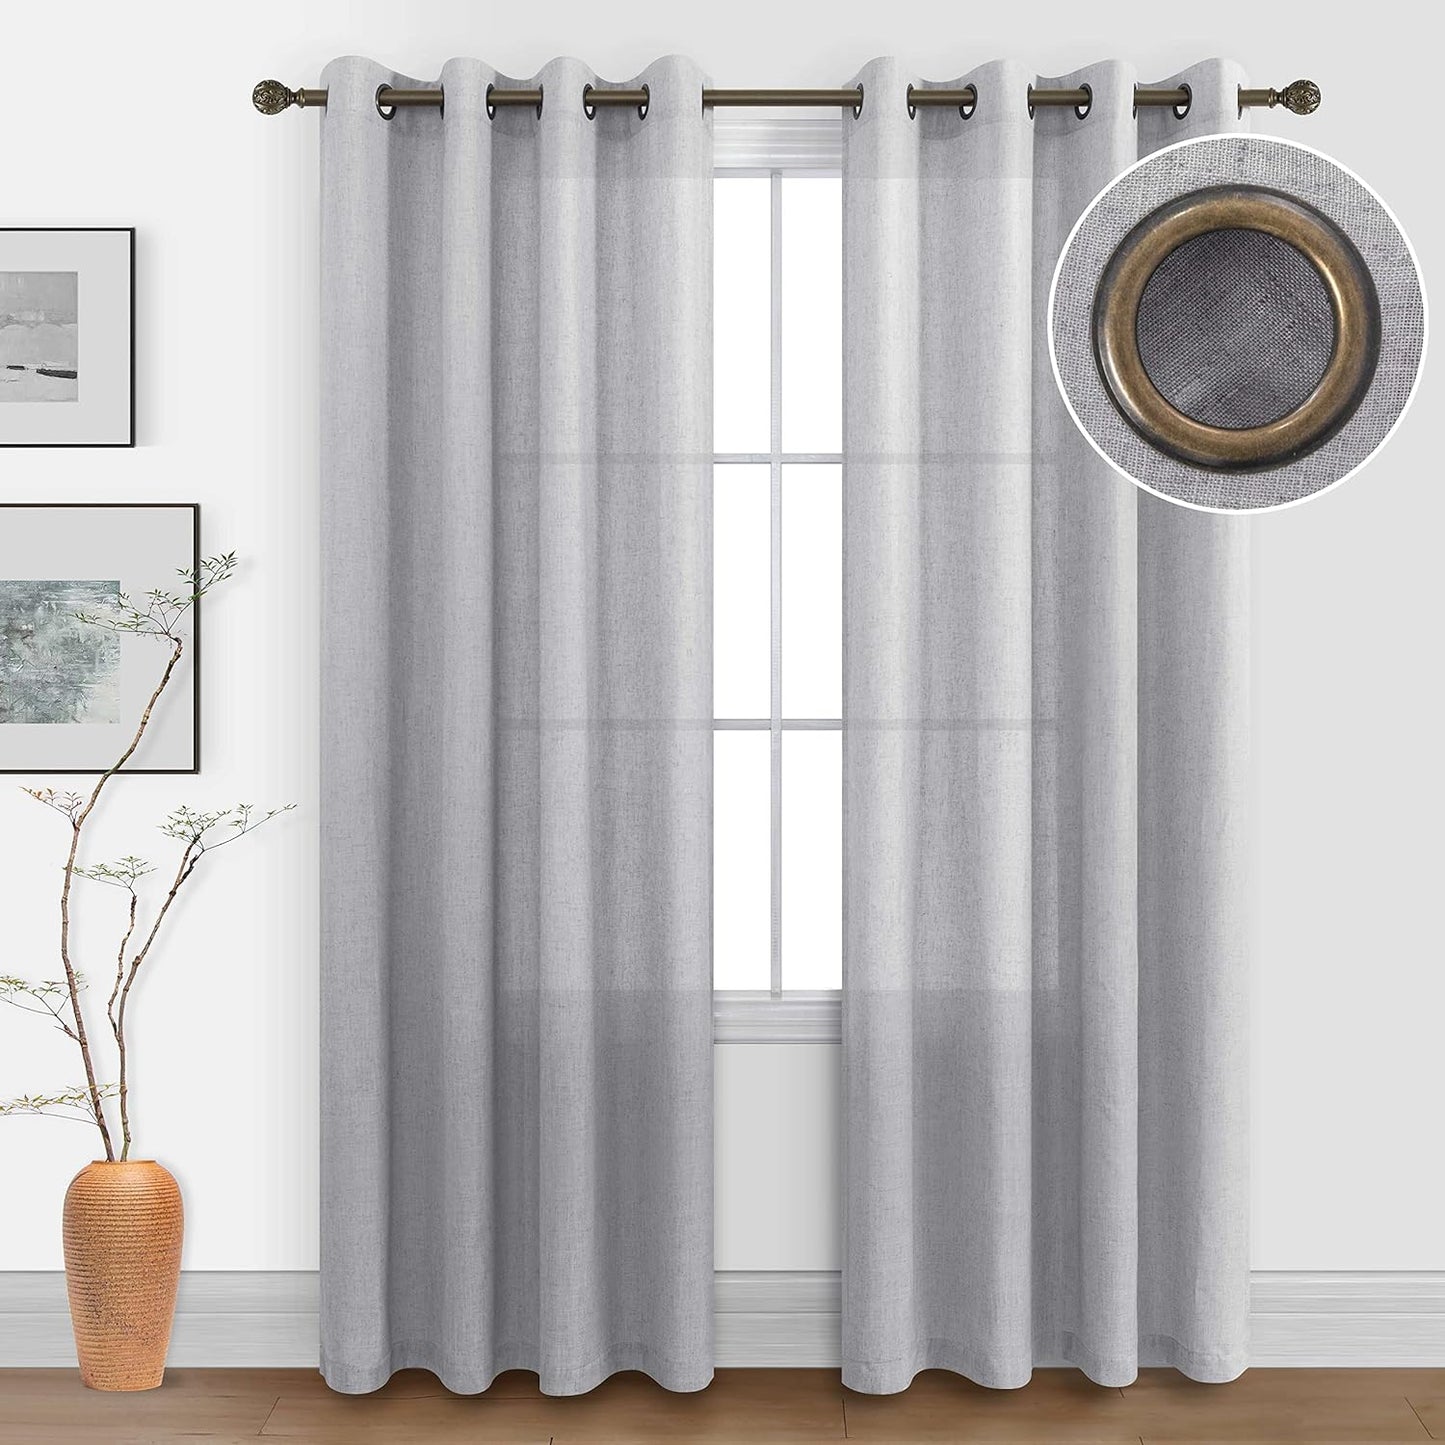 KOUFALL Beige Rustic Country Curtains for Living Room 84 Inches Long Flax Linen Bronze Grommet Tan Sand Color Solid Faux Linen Curtains for Bedroom Sliding Glass Patio Door 2 Panels  KOUFALL TEXTILE Grey 52X84 